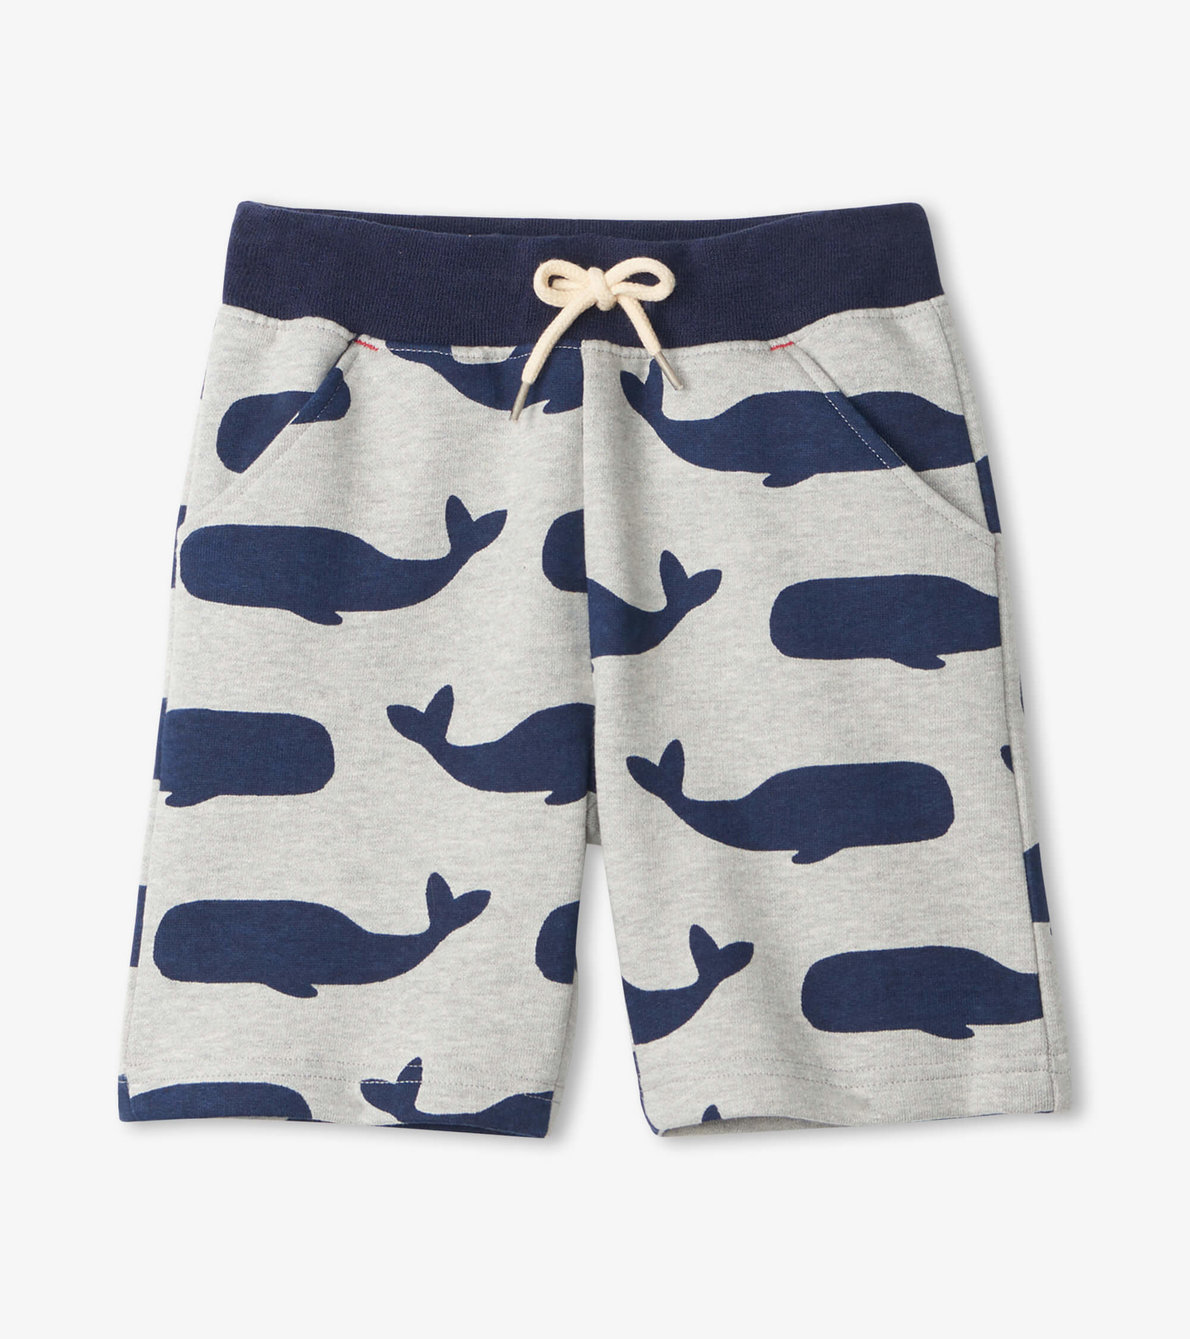 View larger image of Nautical Whales Terry Shorts